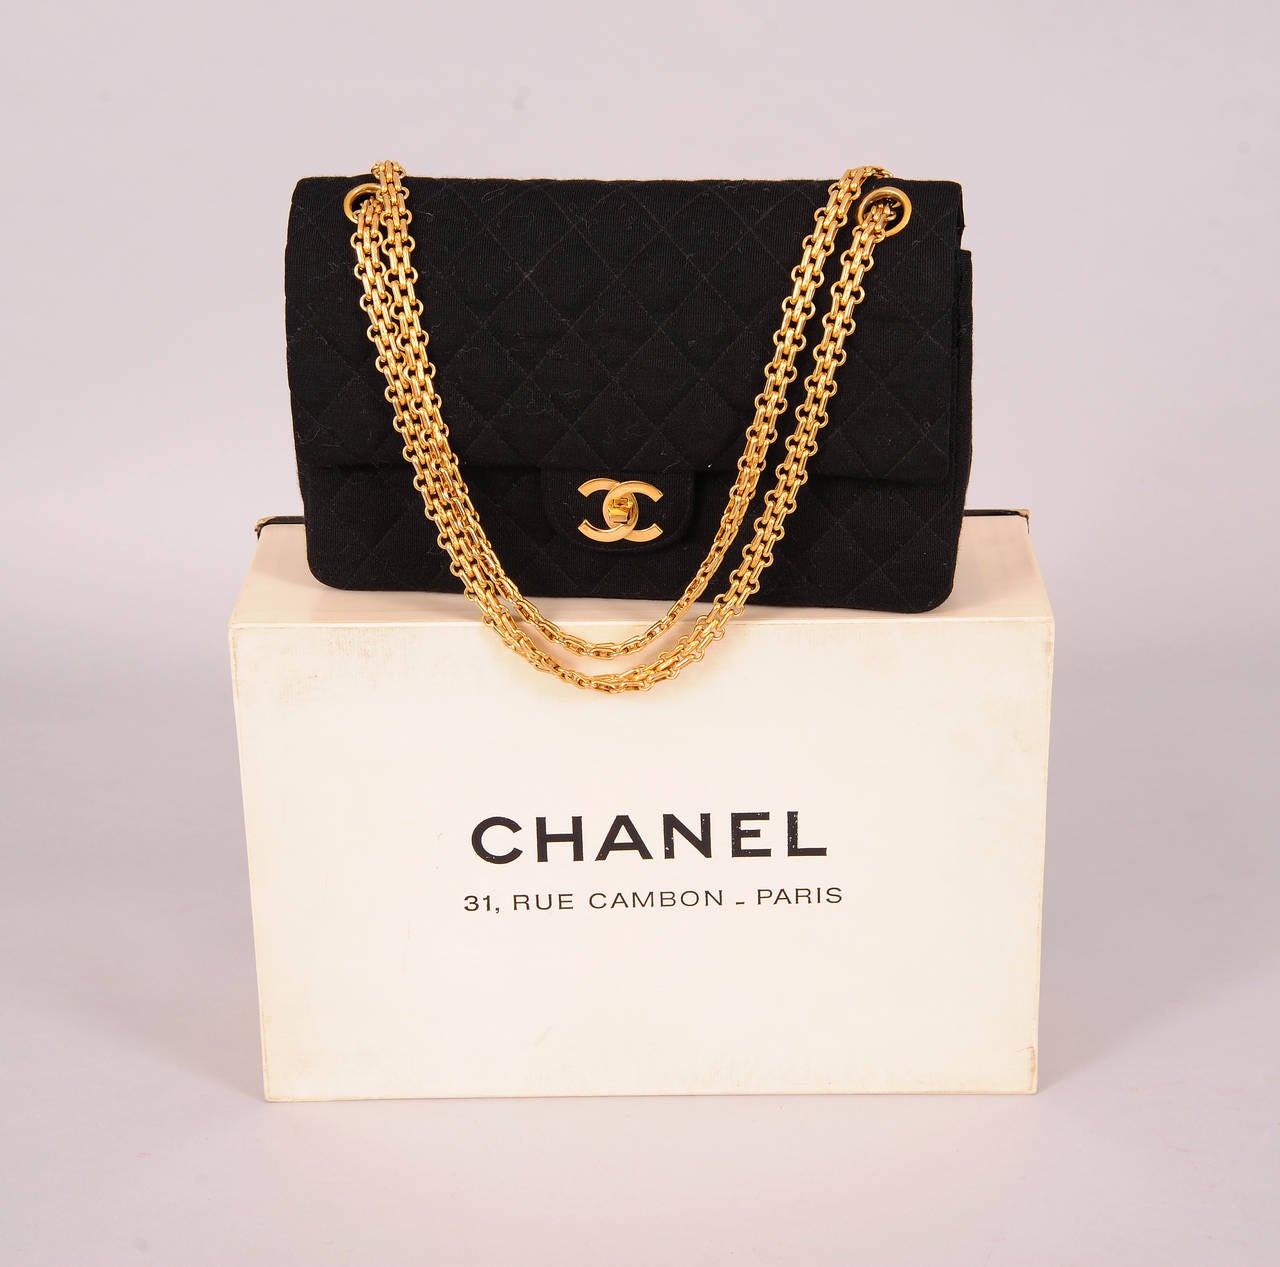 A classic double flap bag from Chanel has a zipper pocket inside the first flap and two open compartments lined In red faille.  The larger section has two slip pockets and an open pocket fro lipstick. The back of the bag also has a slip pocket. A